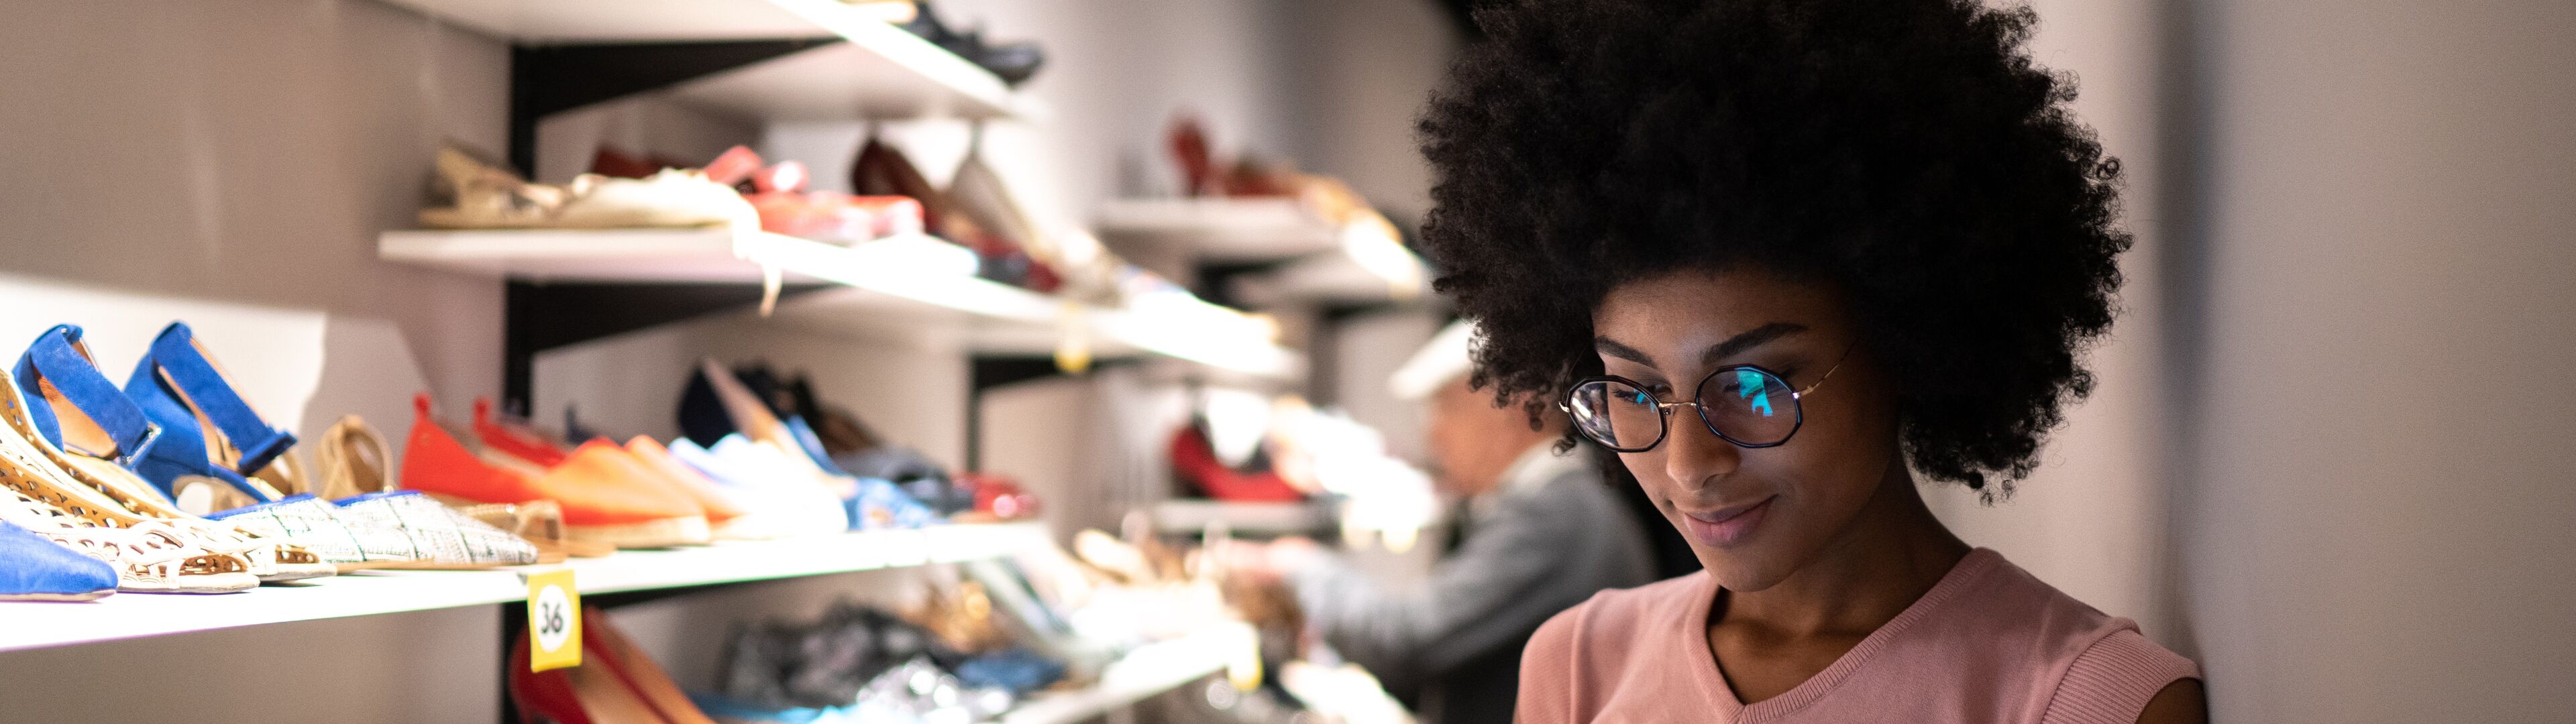 A woman with an afro hairstyle examines a tablet in front of a display of colorful shoes in a store.